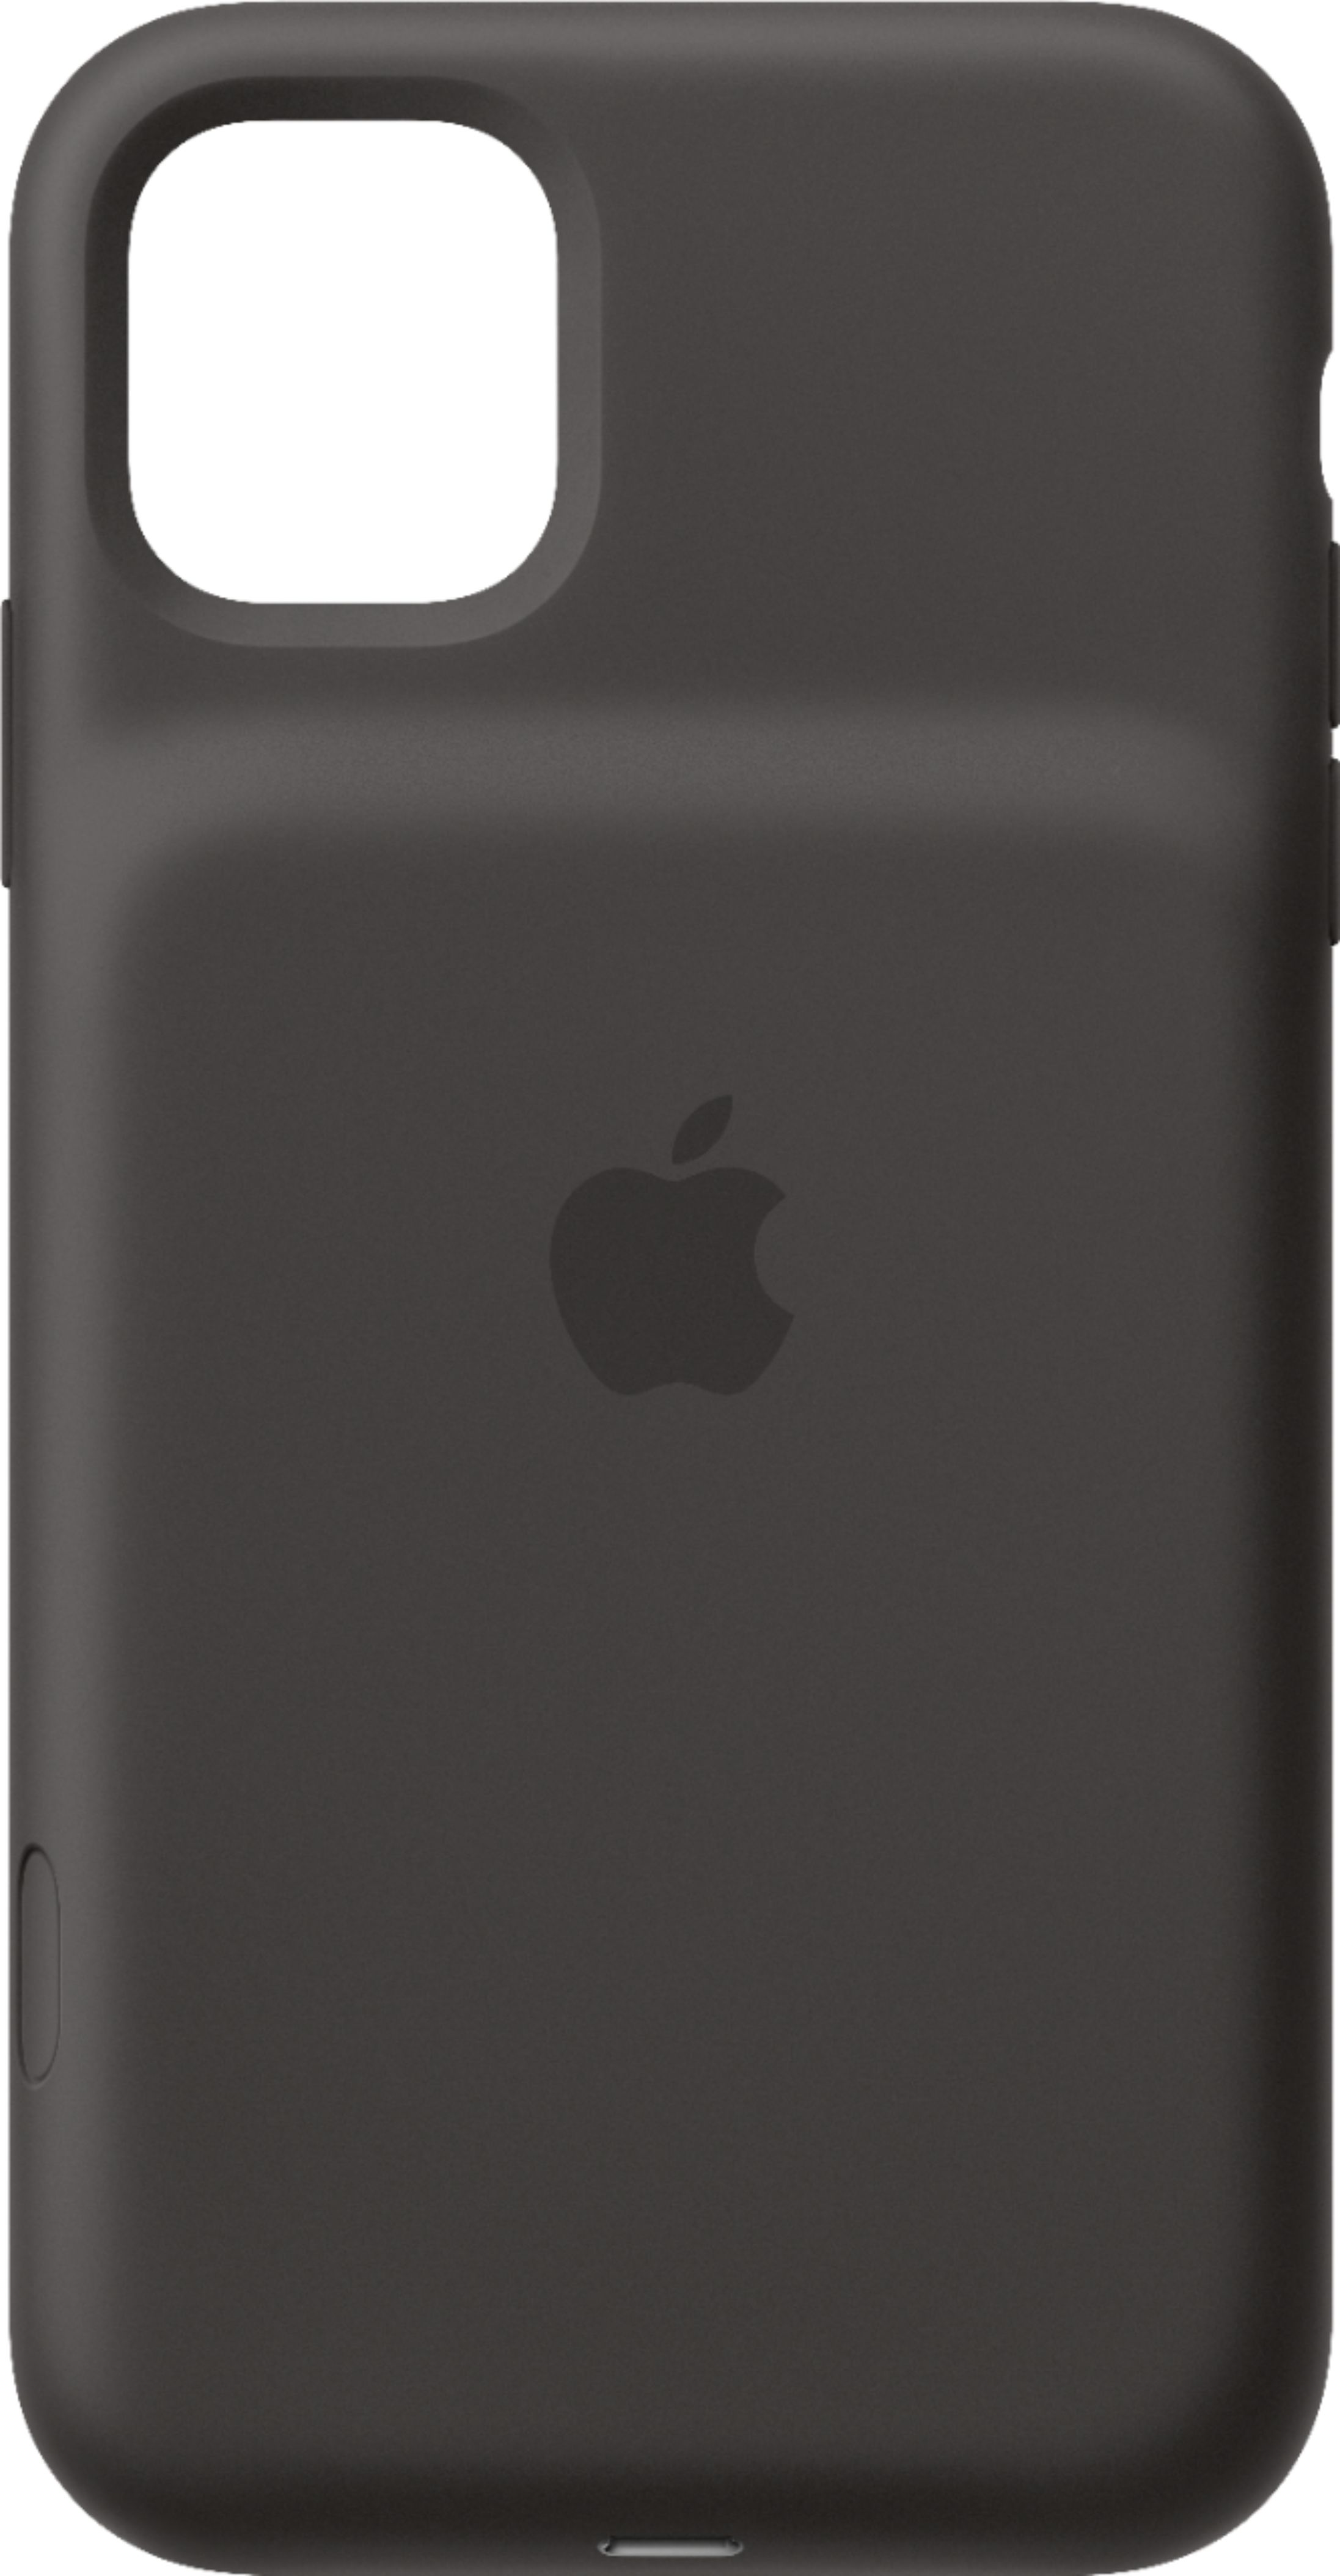 Apple Iphone 11 Smart Battery Case Black Mwvh2ll A Best Buy